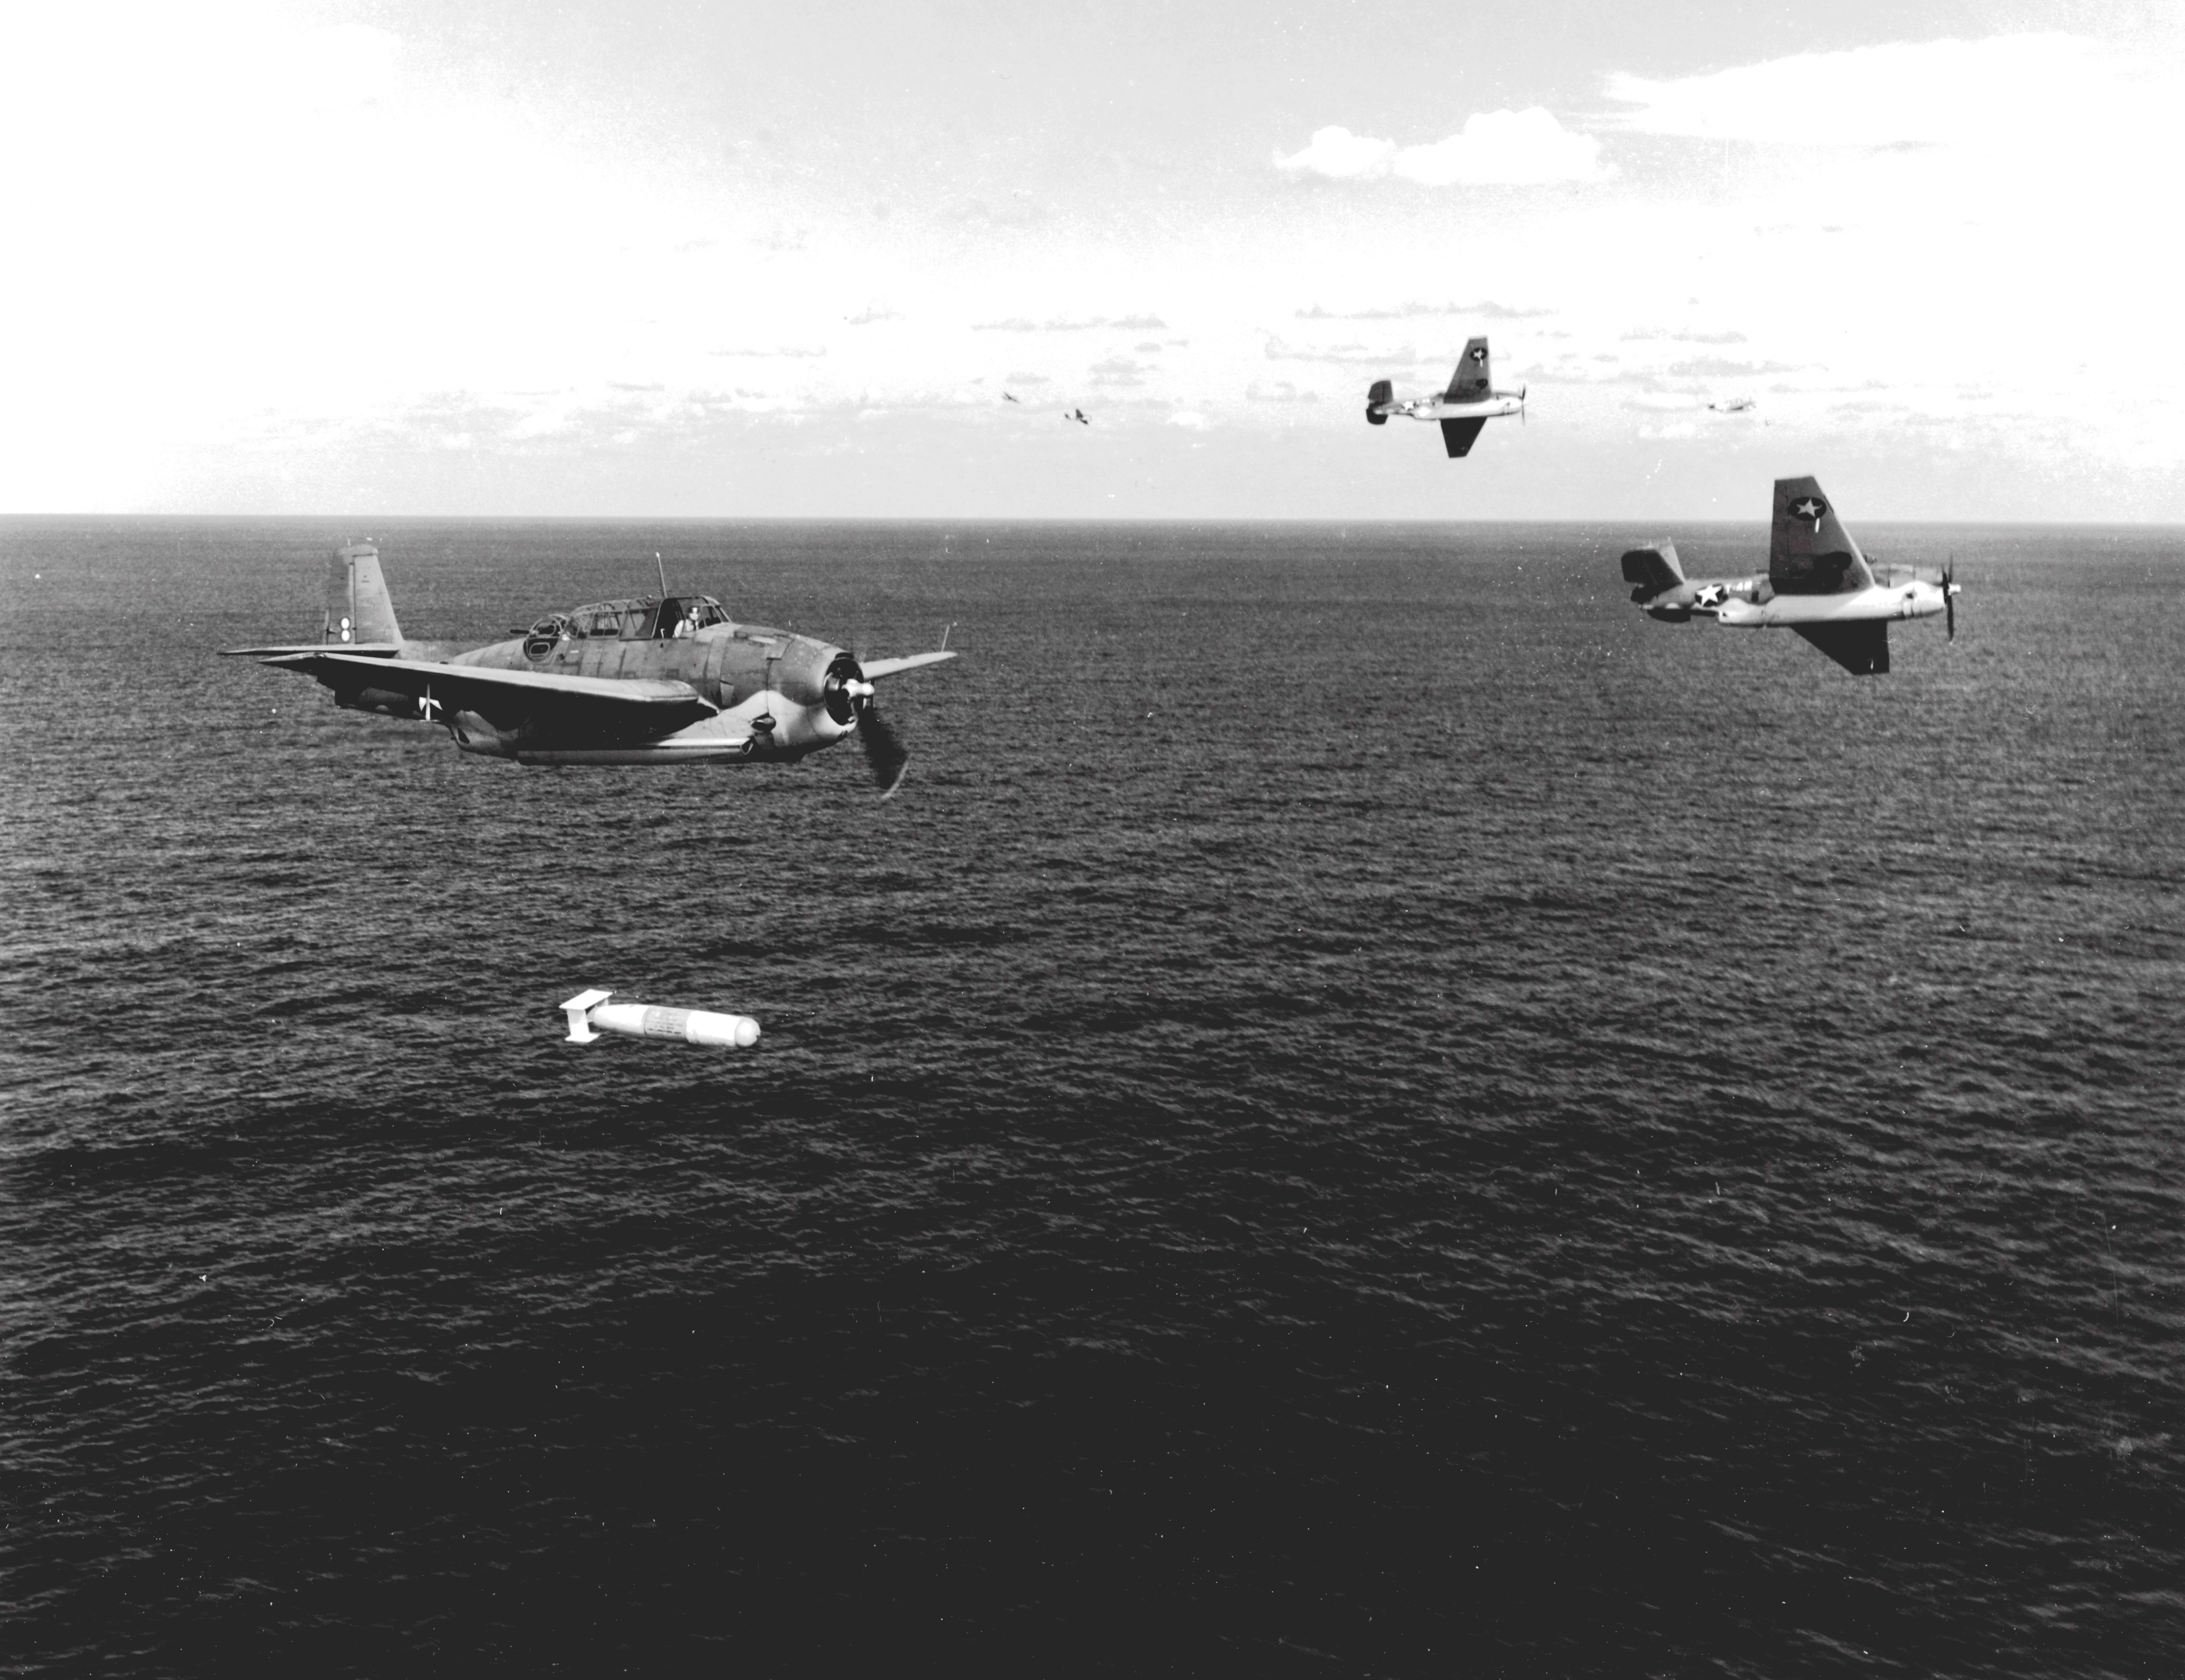 A training flight of TBF-1 Avengers lining up to drop practice torpedoes, late 1942, off the east coast of the United States. Photo 3 of 4.